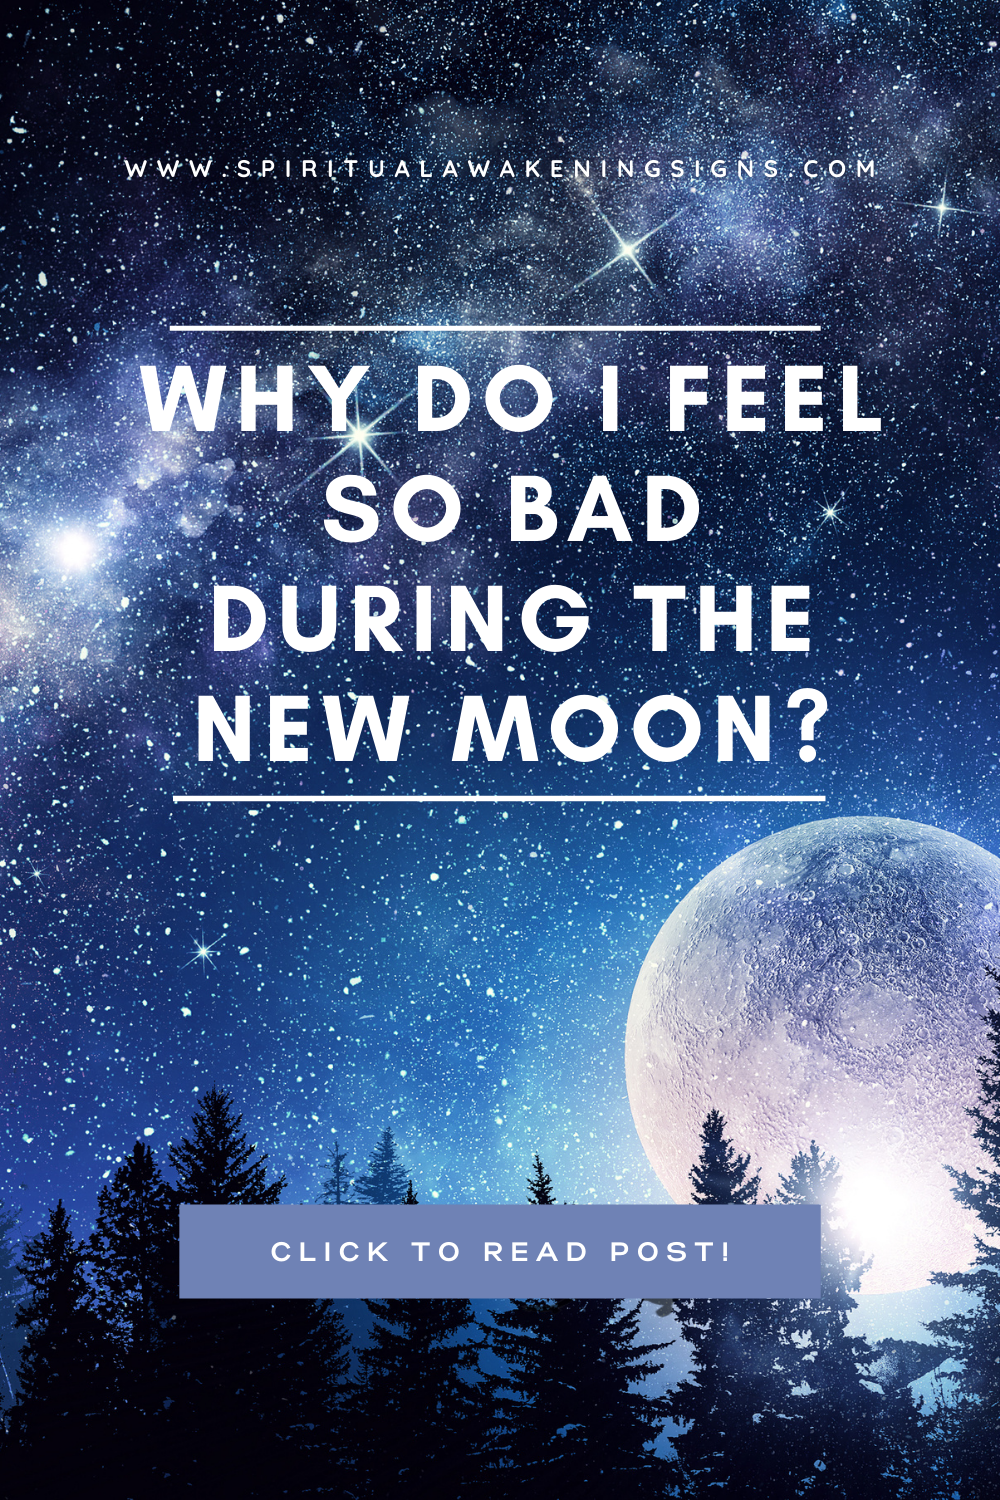 Why Do I Feel So Bad During The New Moon?